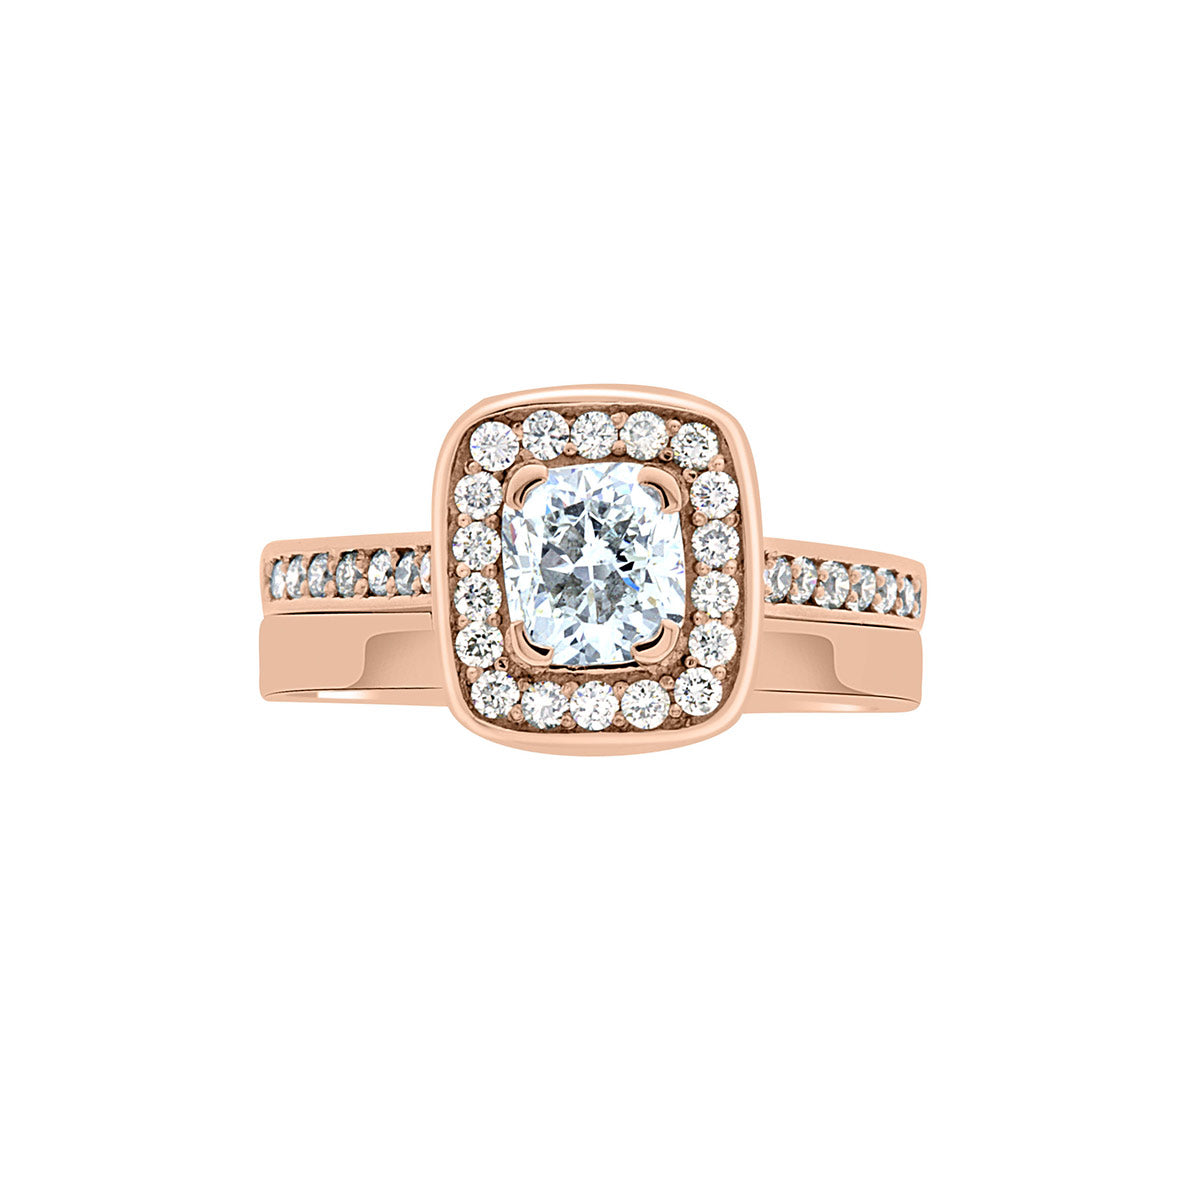 Cushion Cut Diamond Ring in rose gold with a matching rose gold wedding band